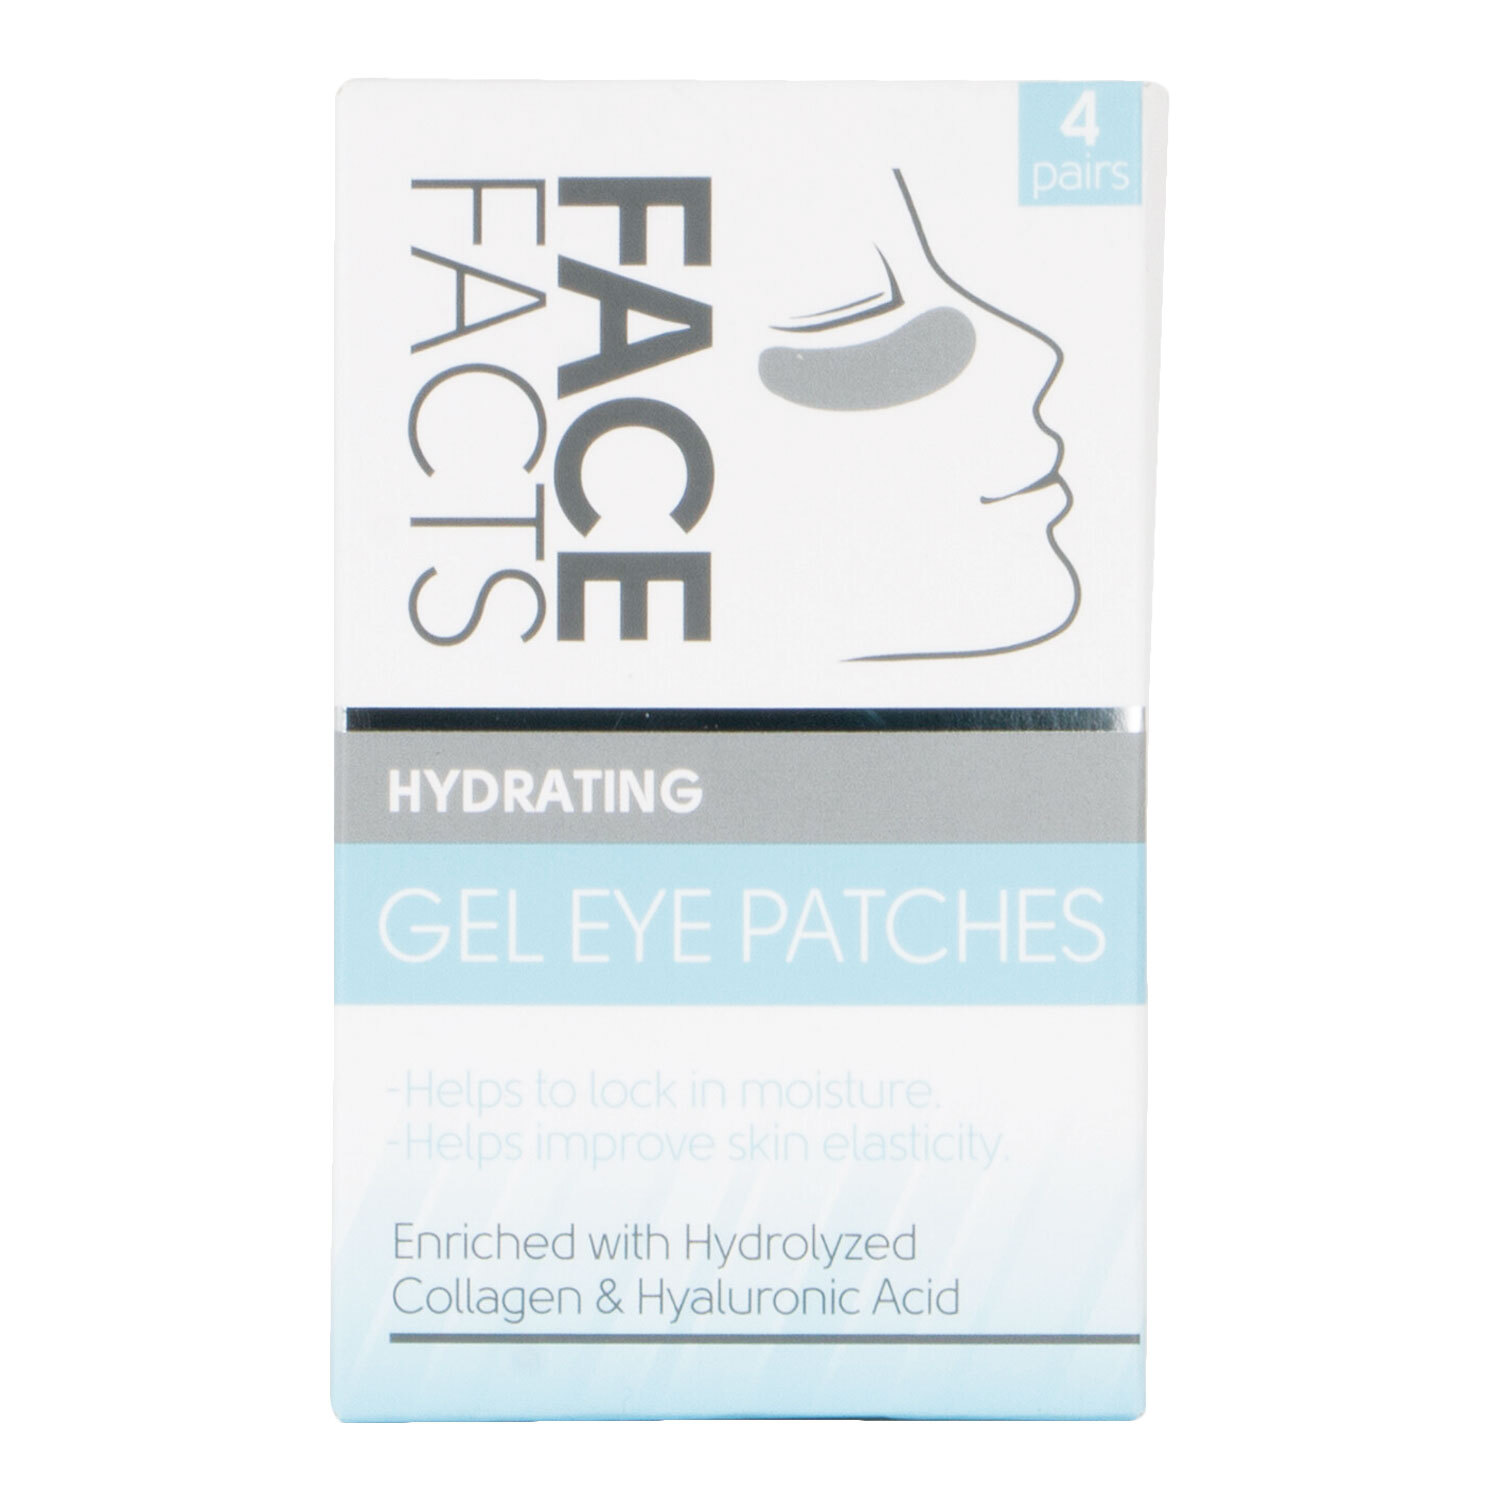 Face Facts Hydrating Gel Eye Patches Image